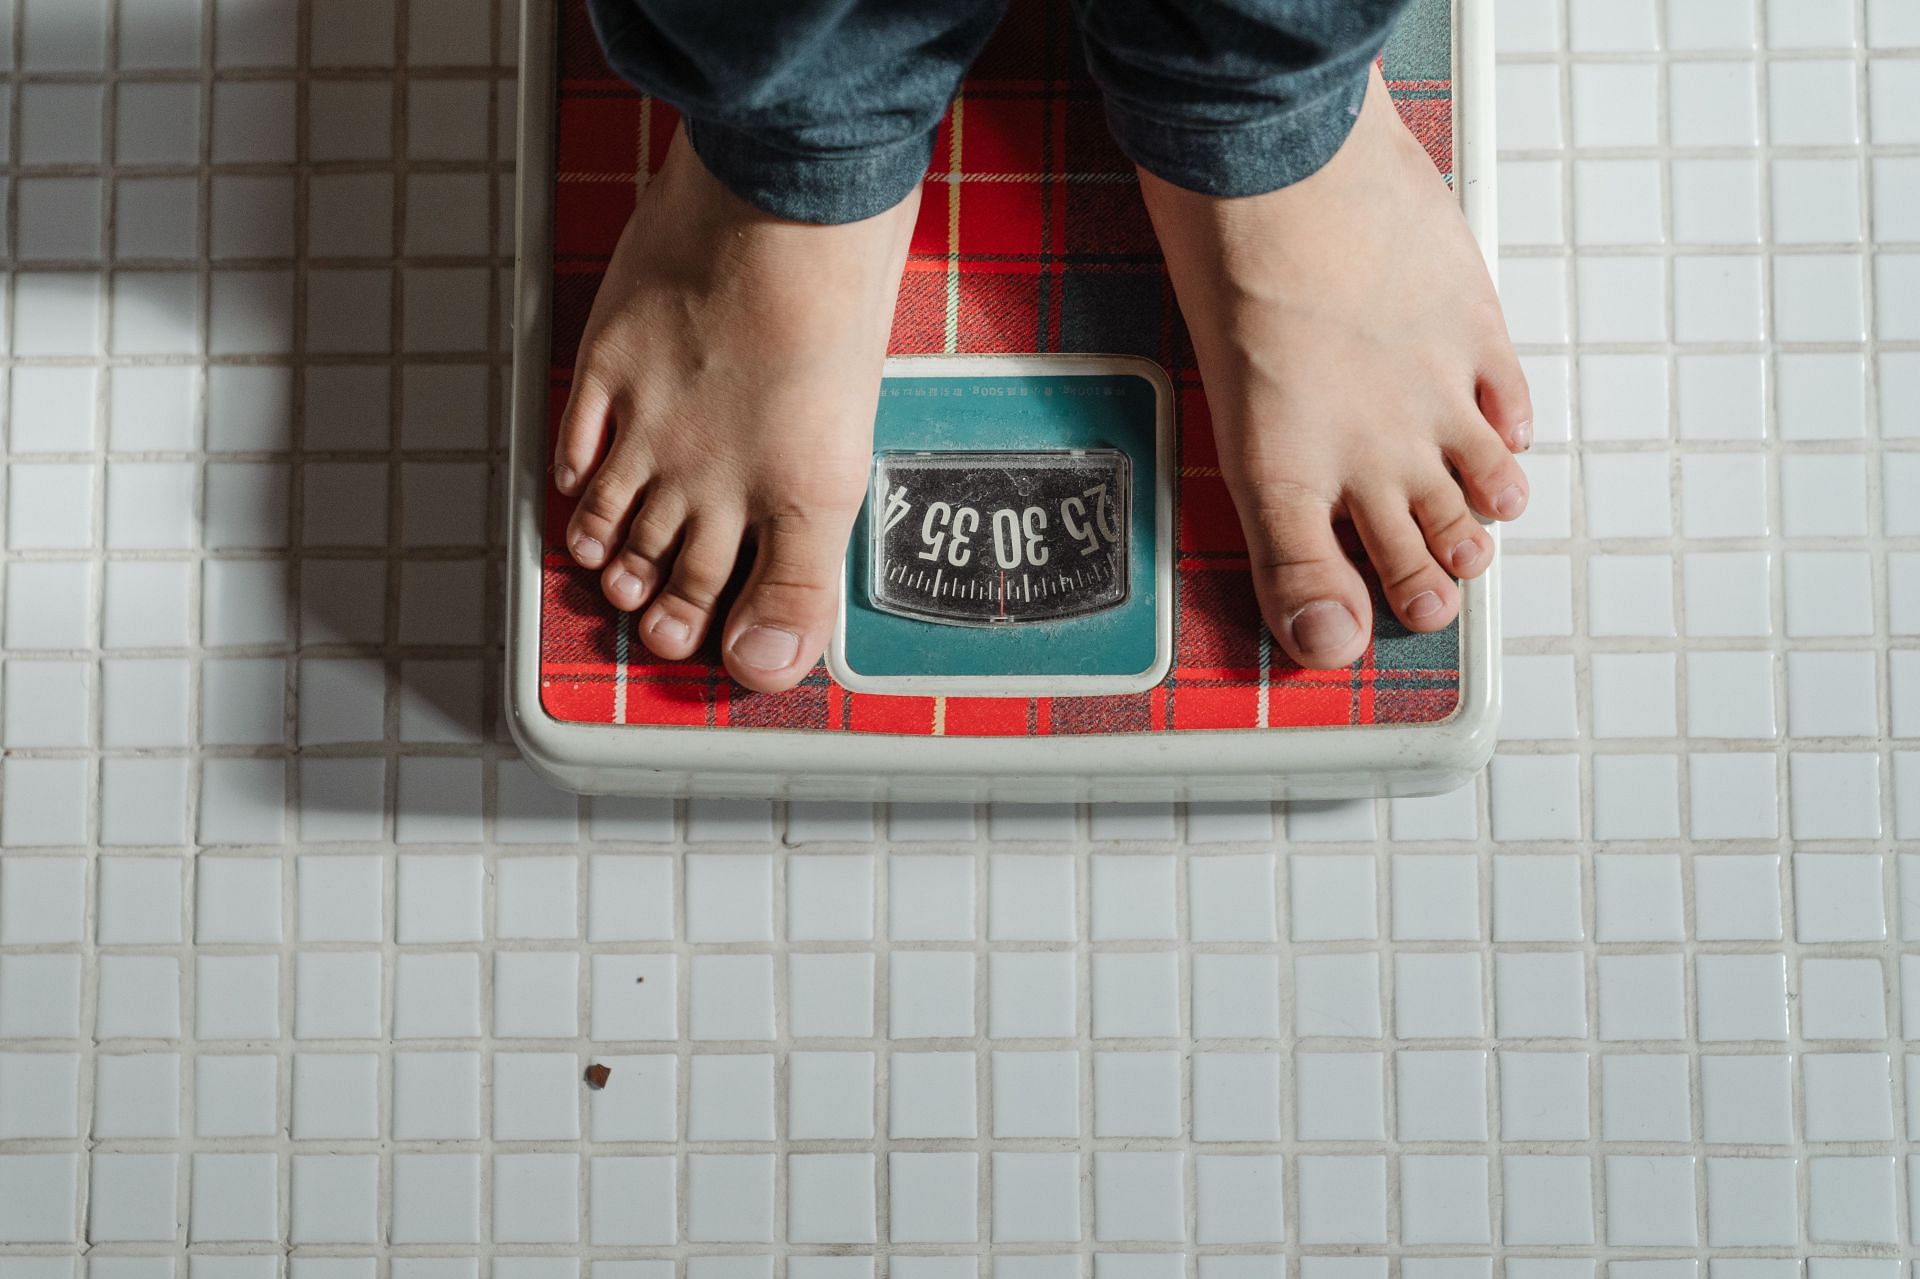 Weight loss tips to reduce excess weight (Image via Pexels/Ketut Subiyanto)